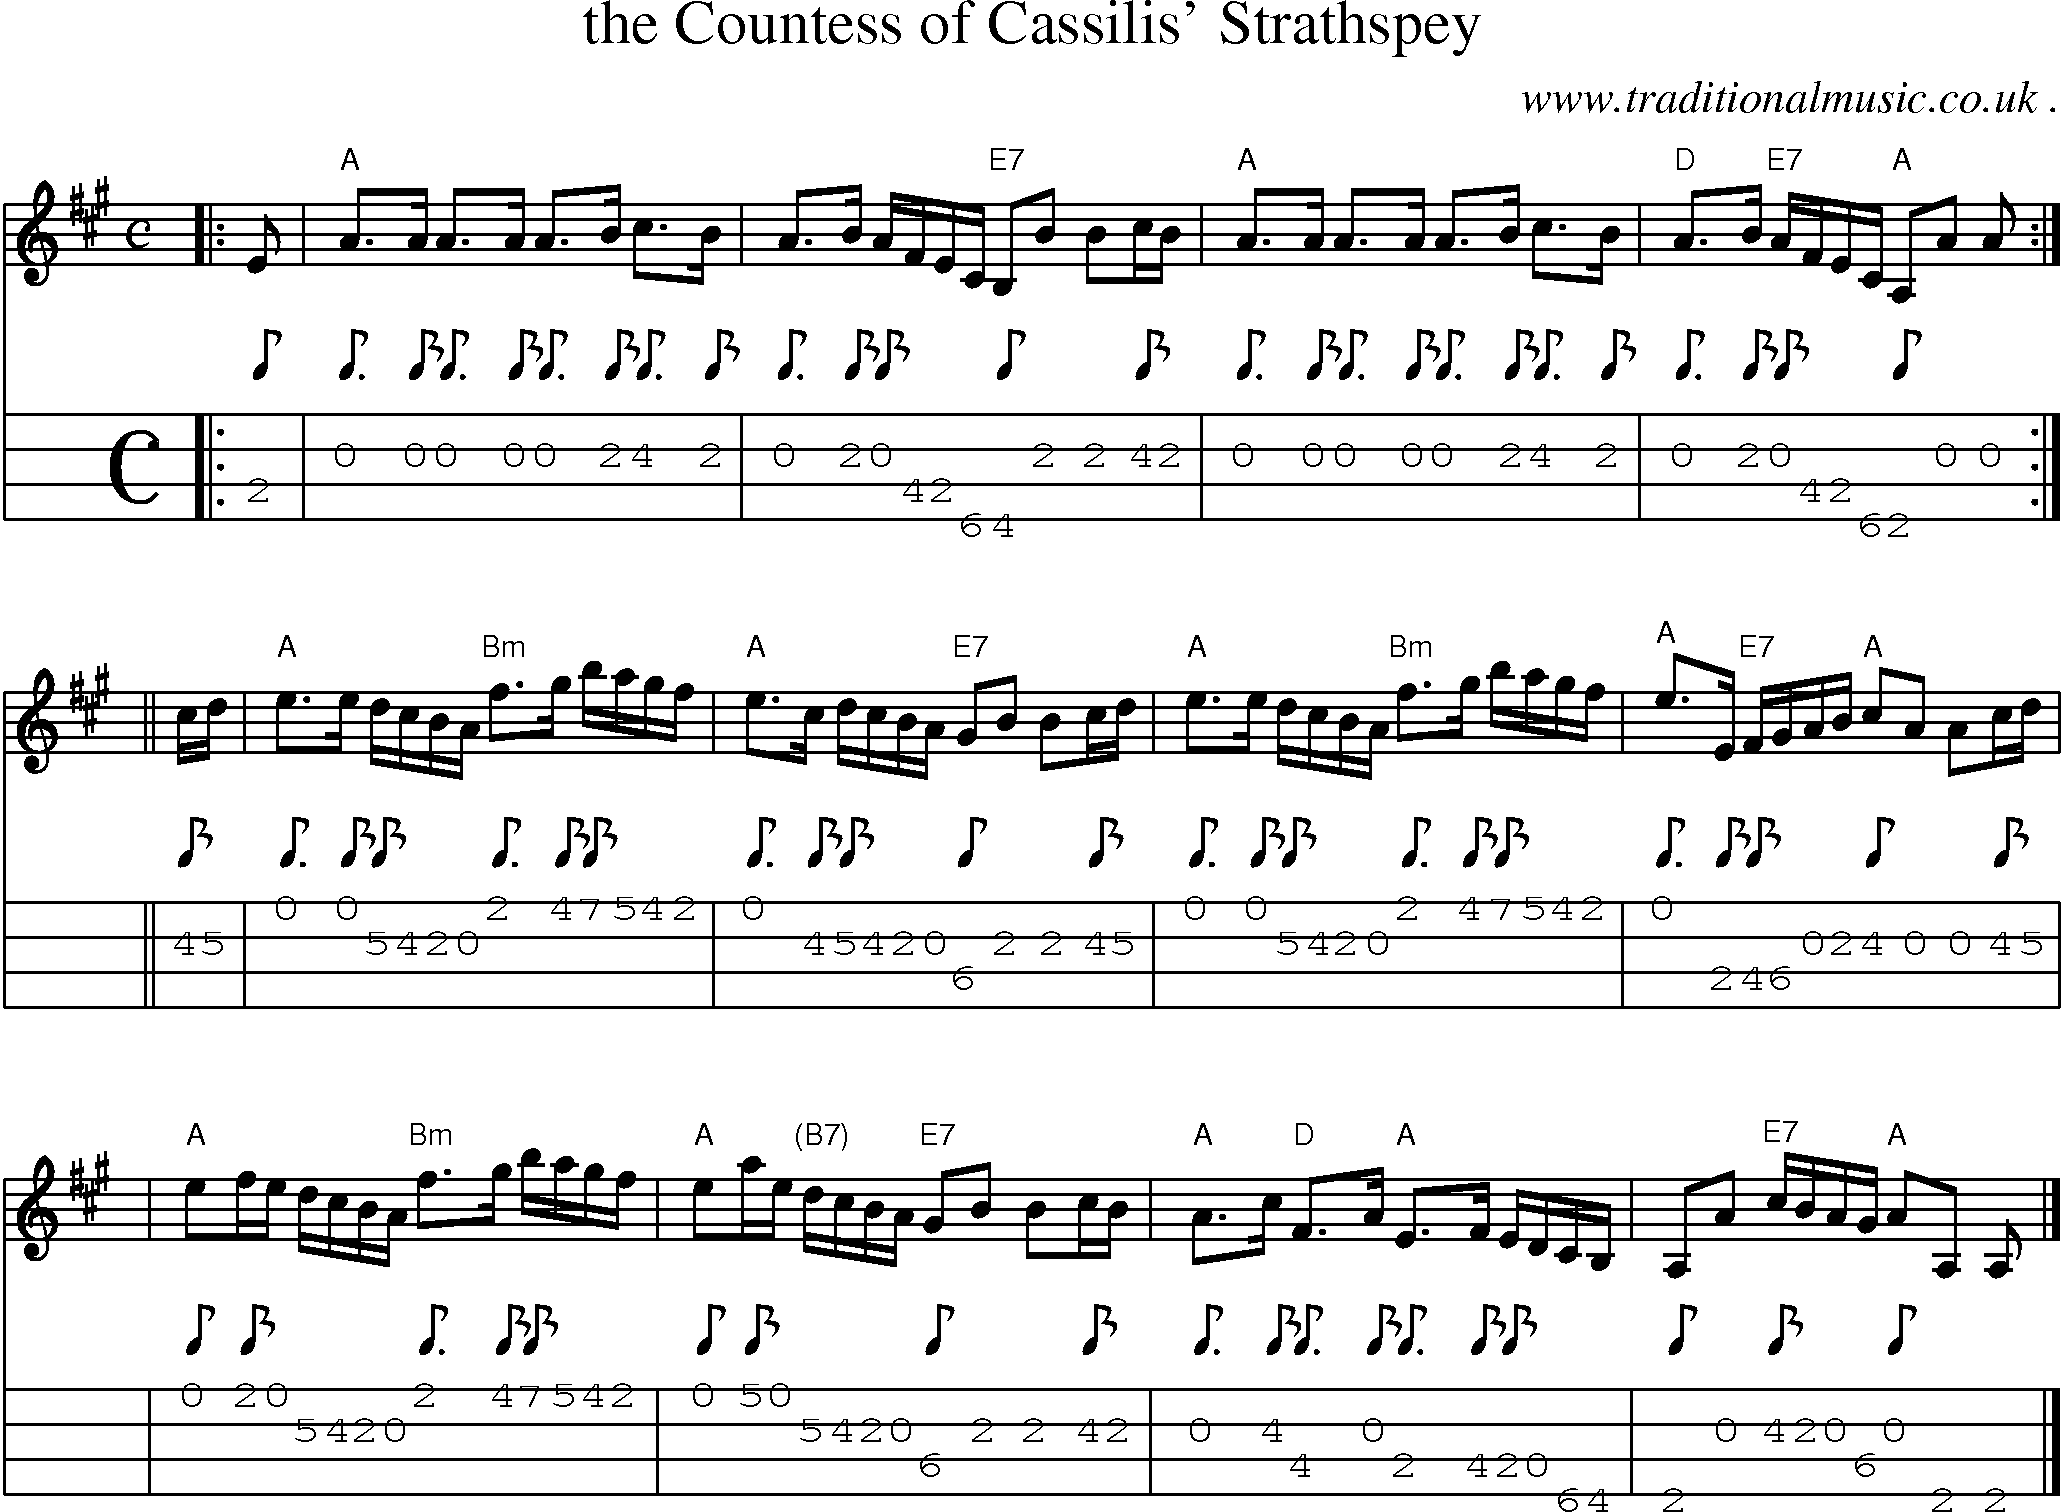 Sheet-music  score, Chords and Mandolin Tabs for The Countess Of Cassilis Strathspey